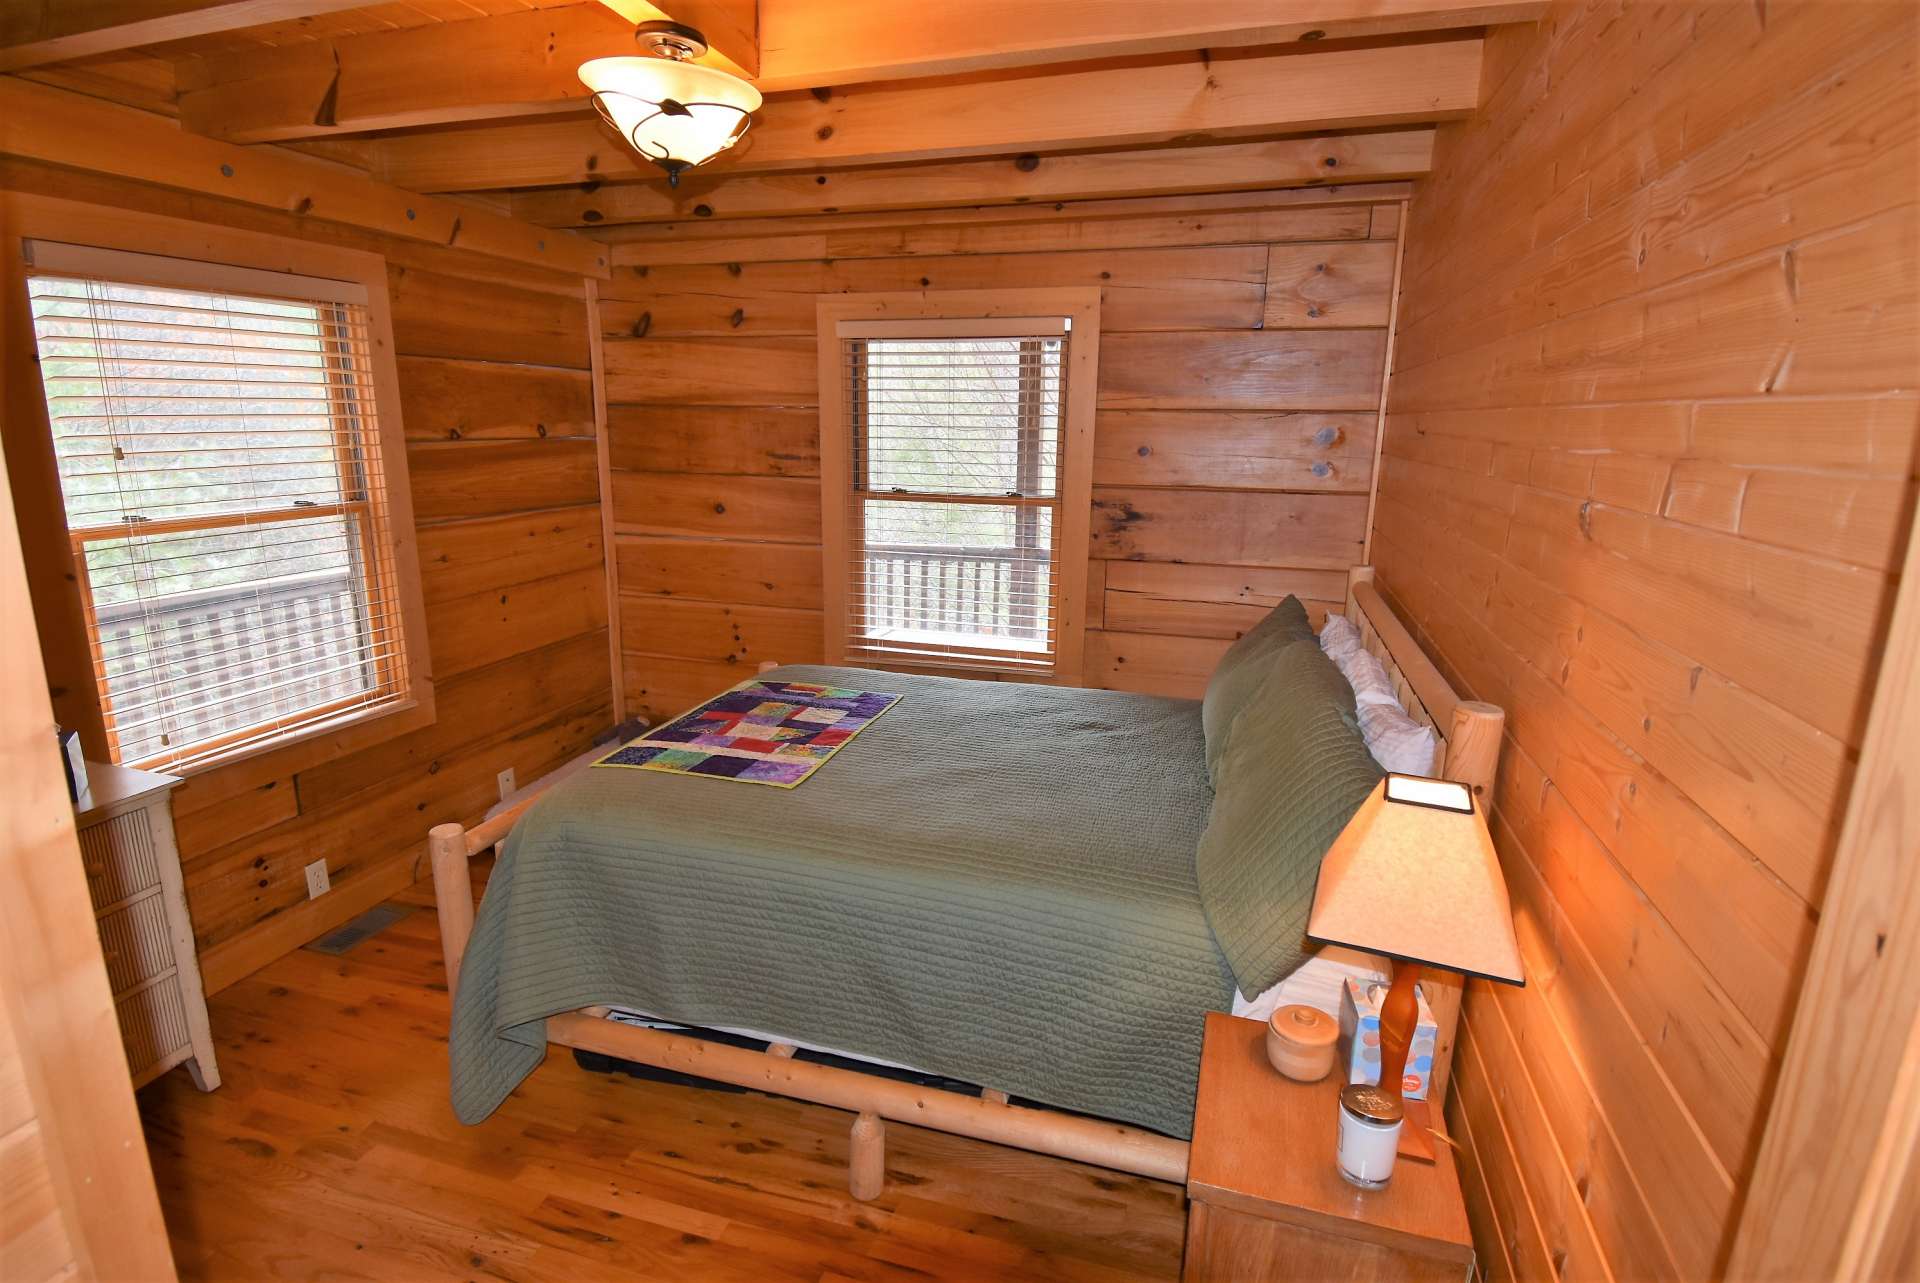 The main level bedroom is  amply sized with exposed beams and features lots of natural light.